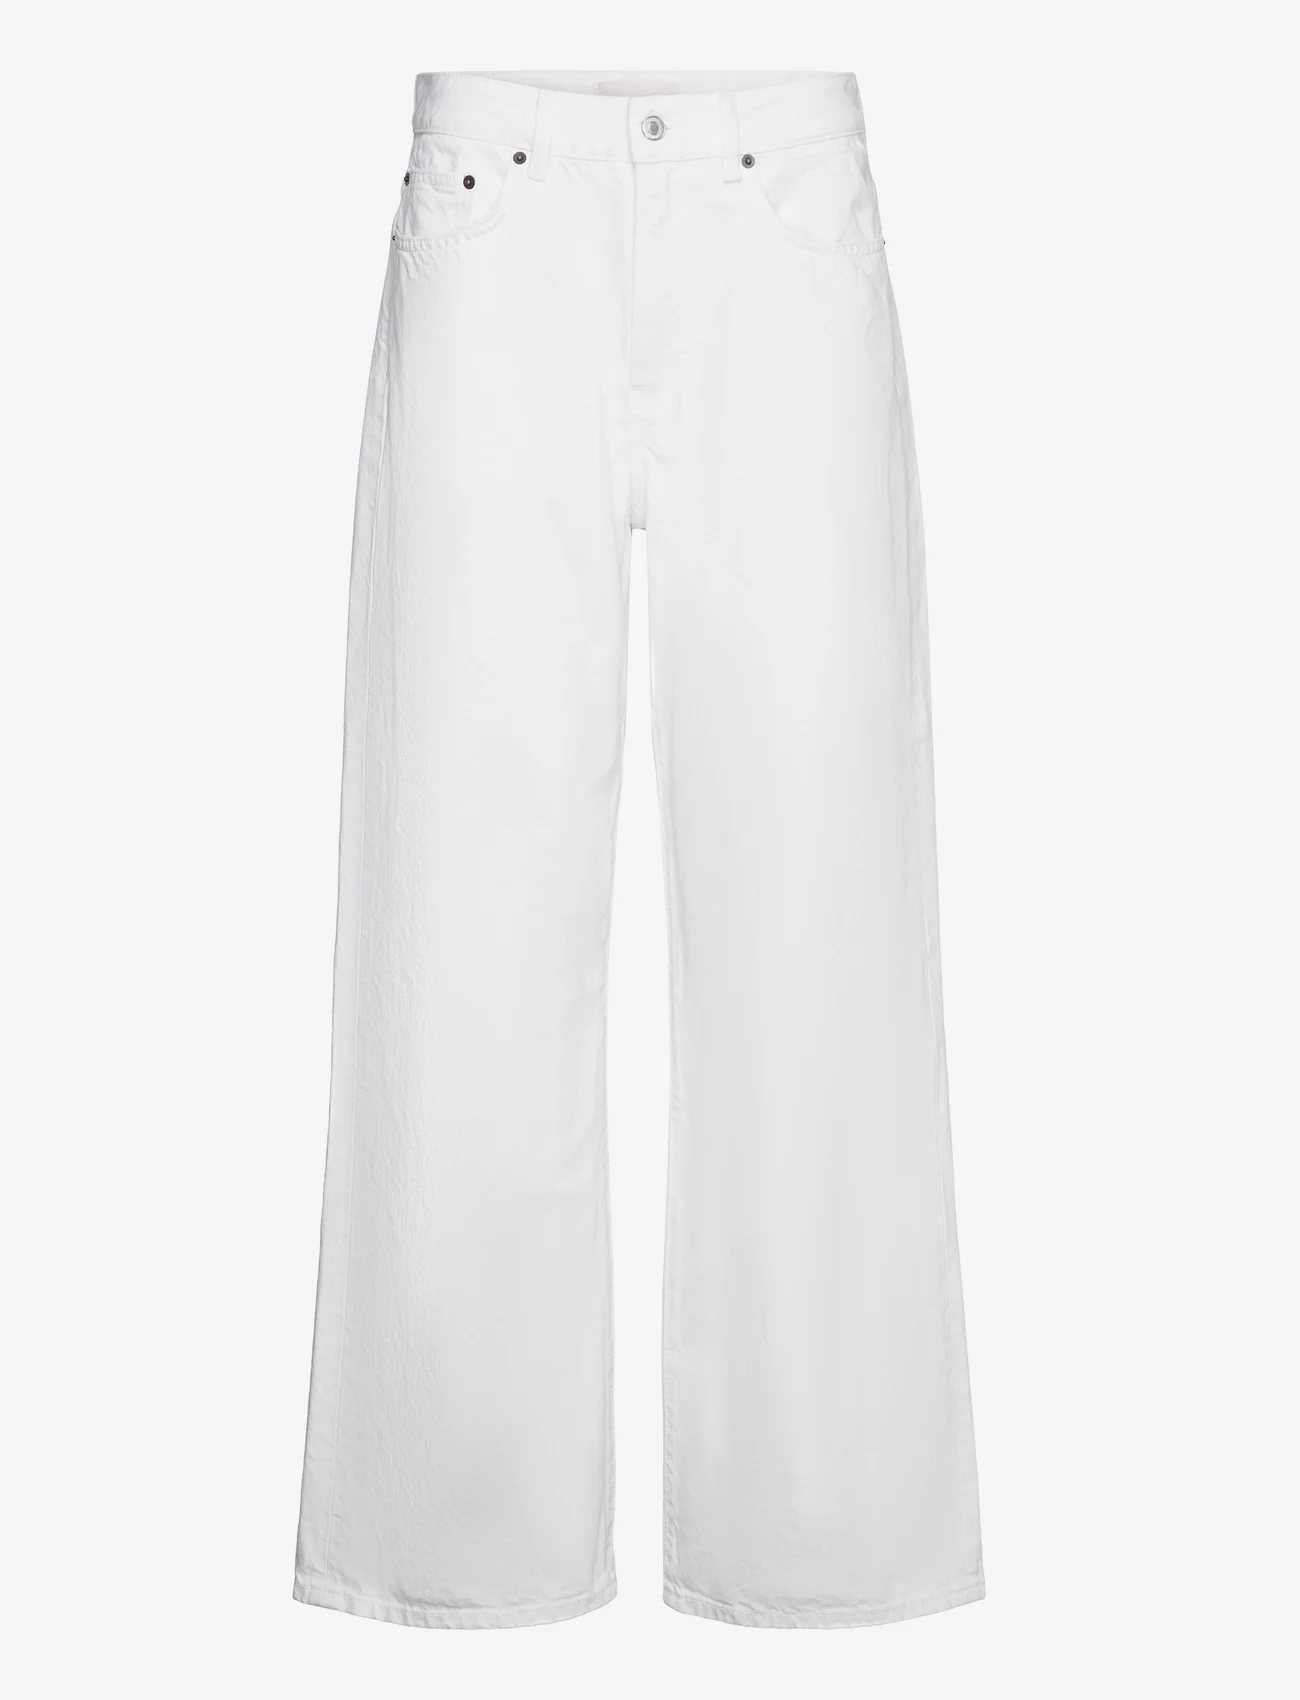 Jeanerica - BW017 Belem - wide leg jeans - natural white - 0